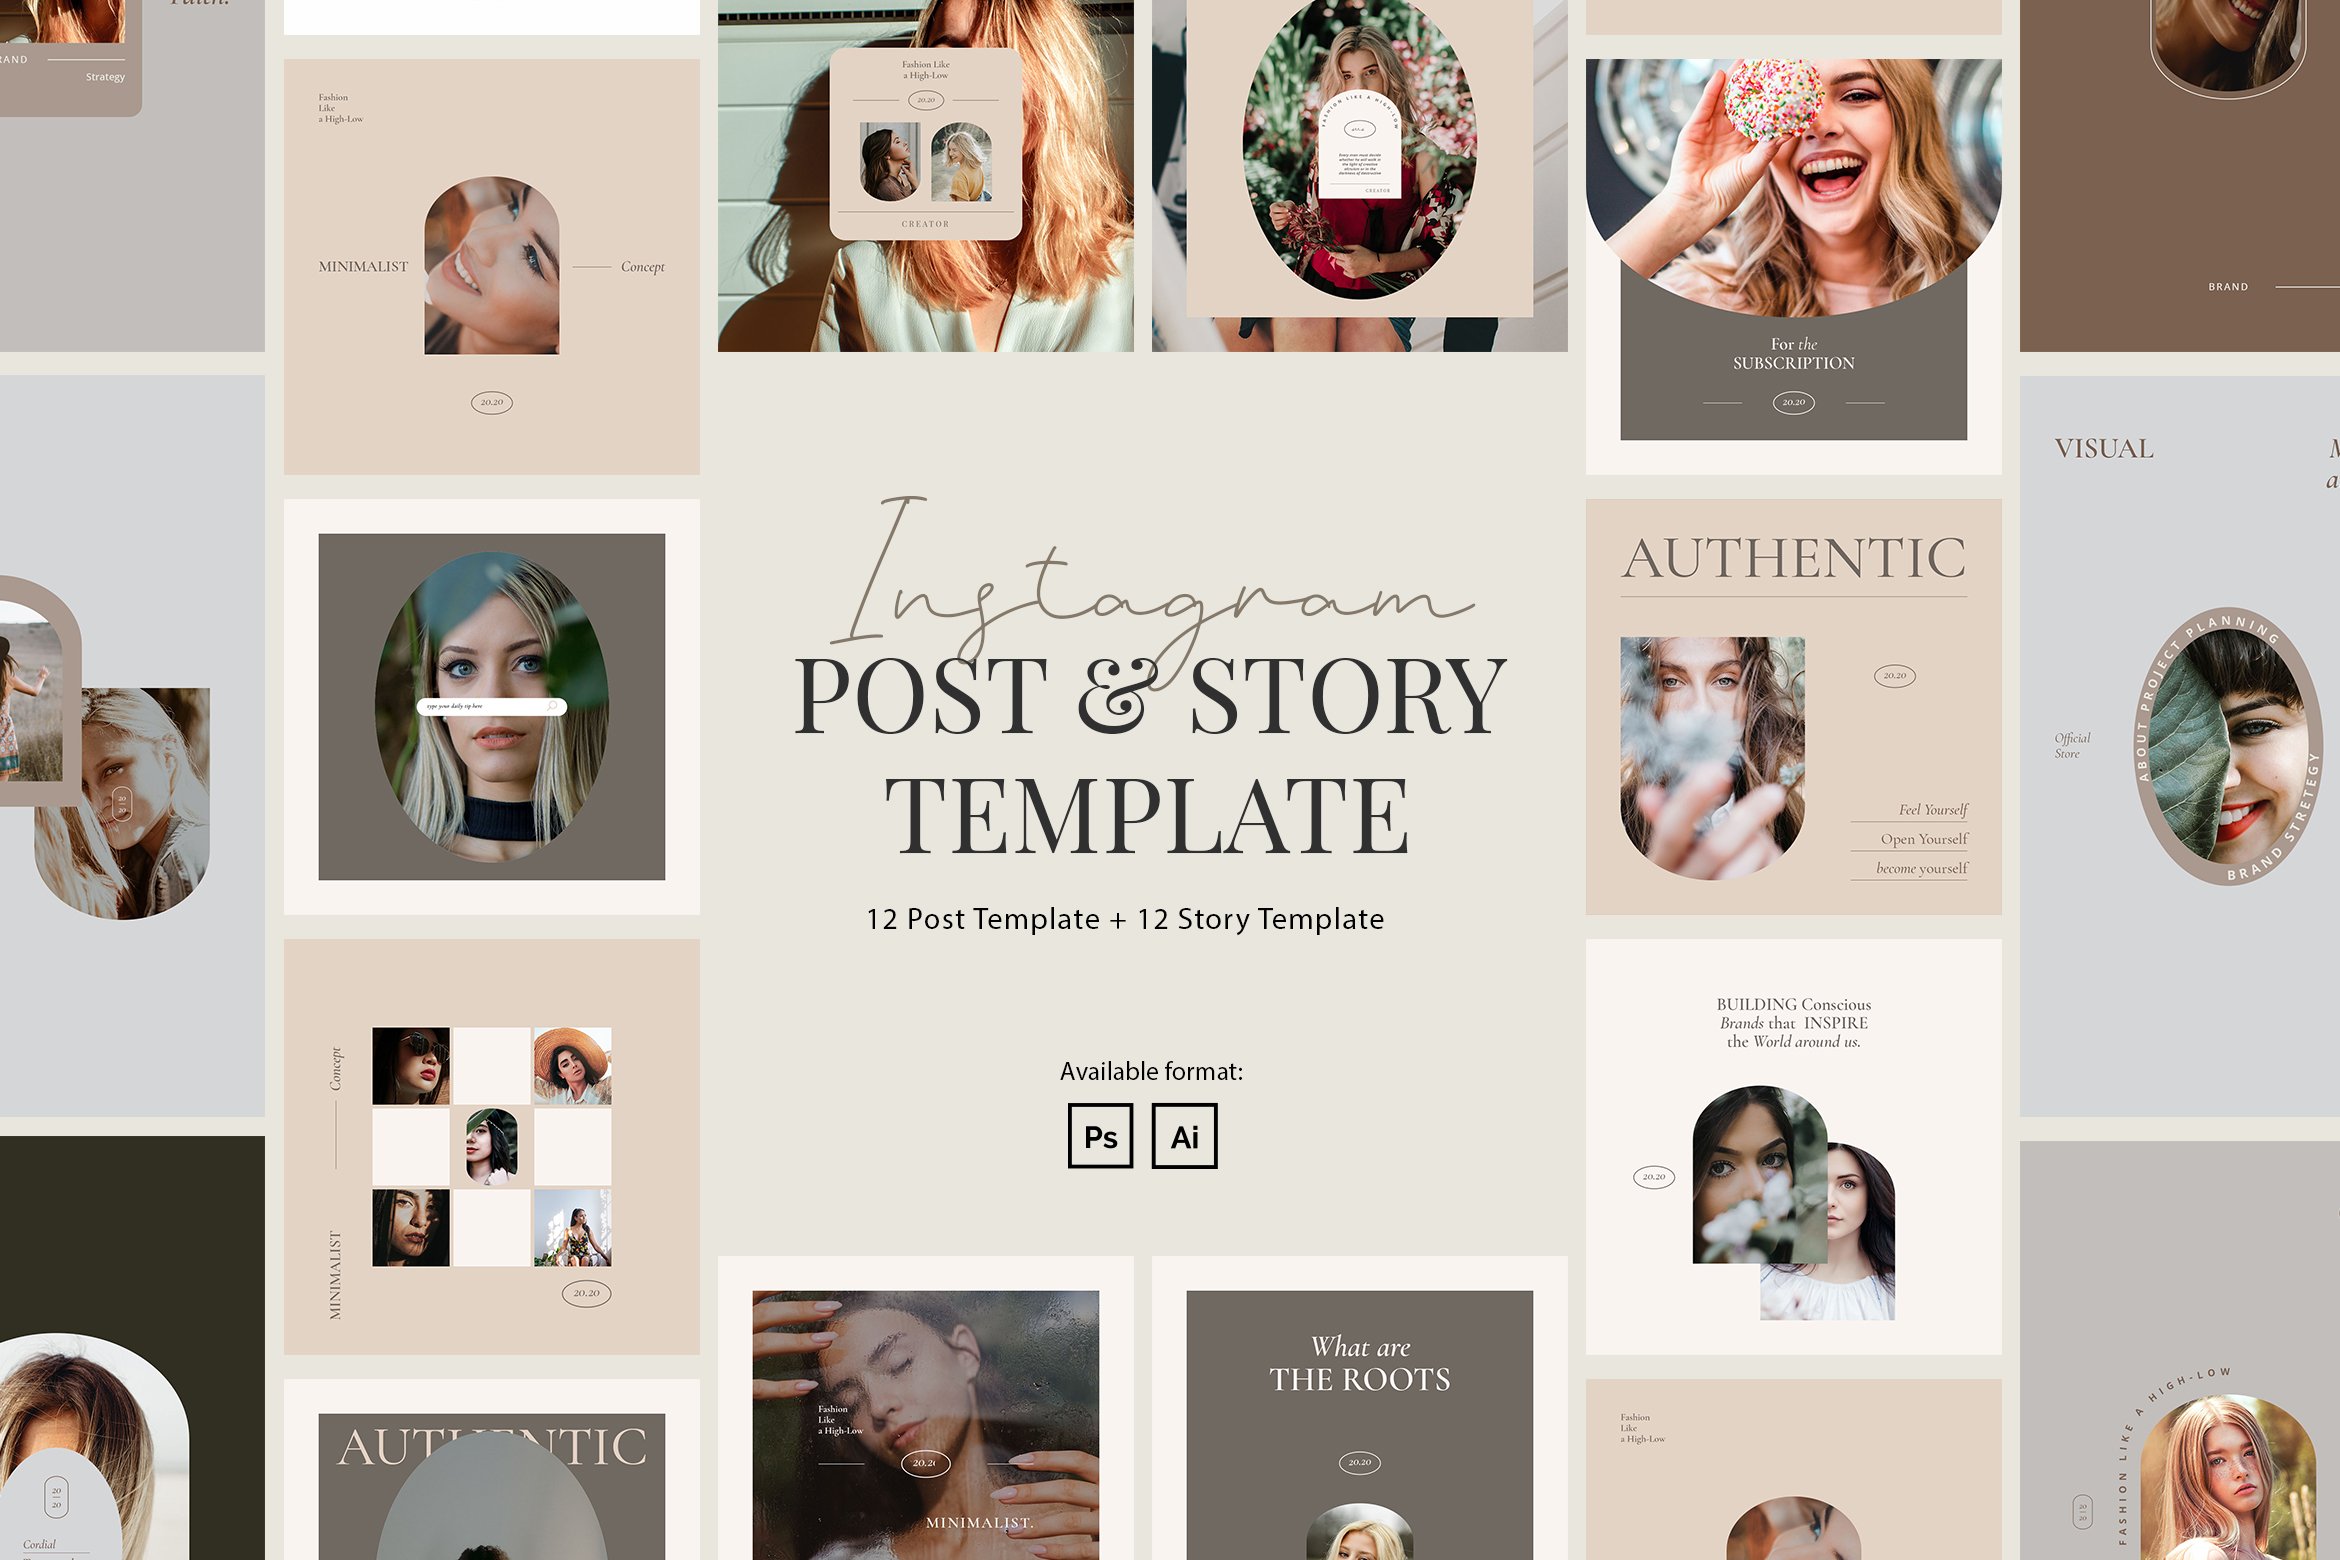 Pastel template for creating a stylish instagram profile.